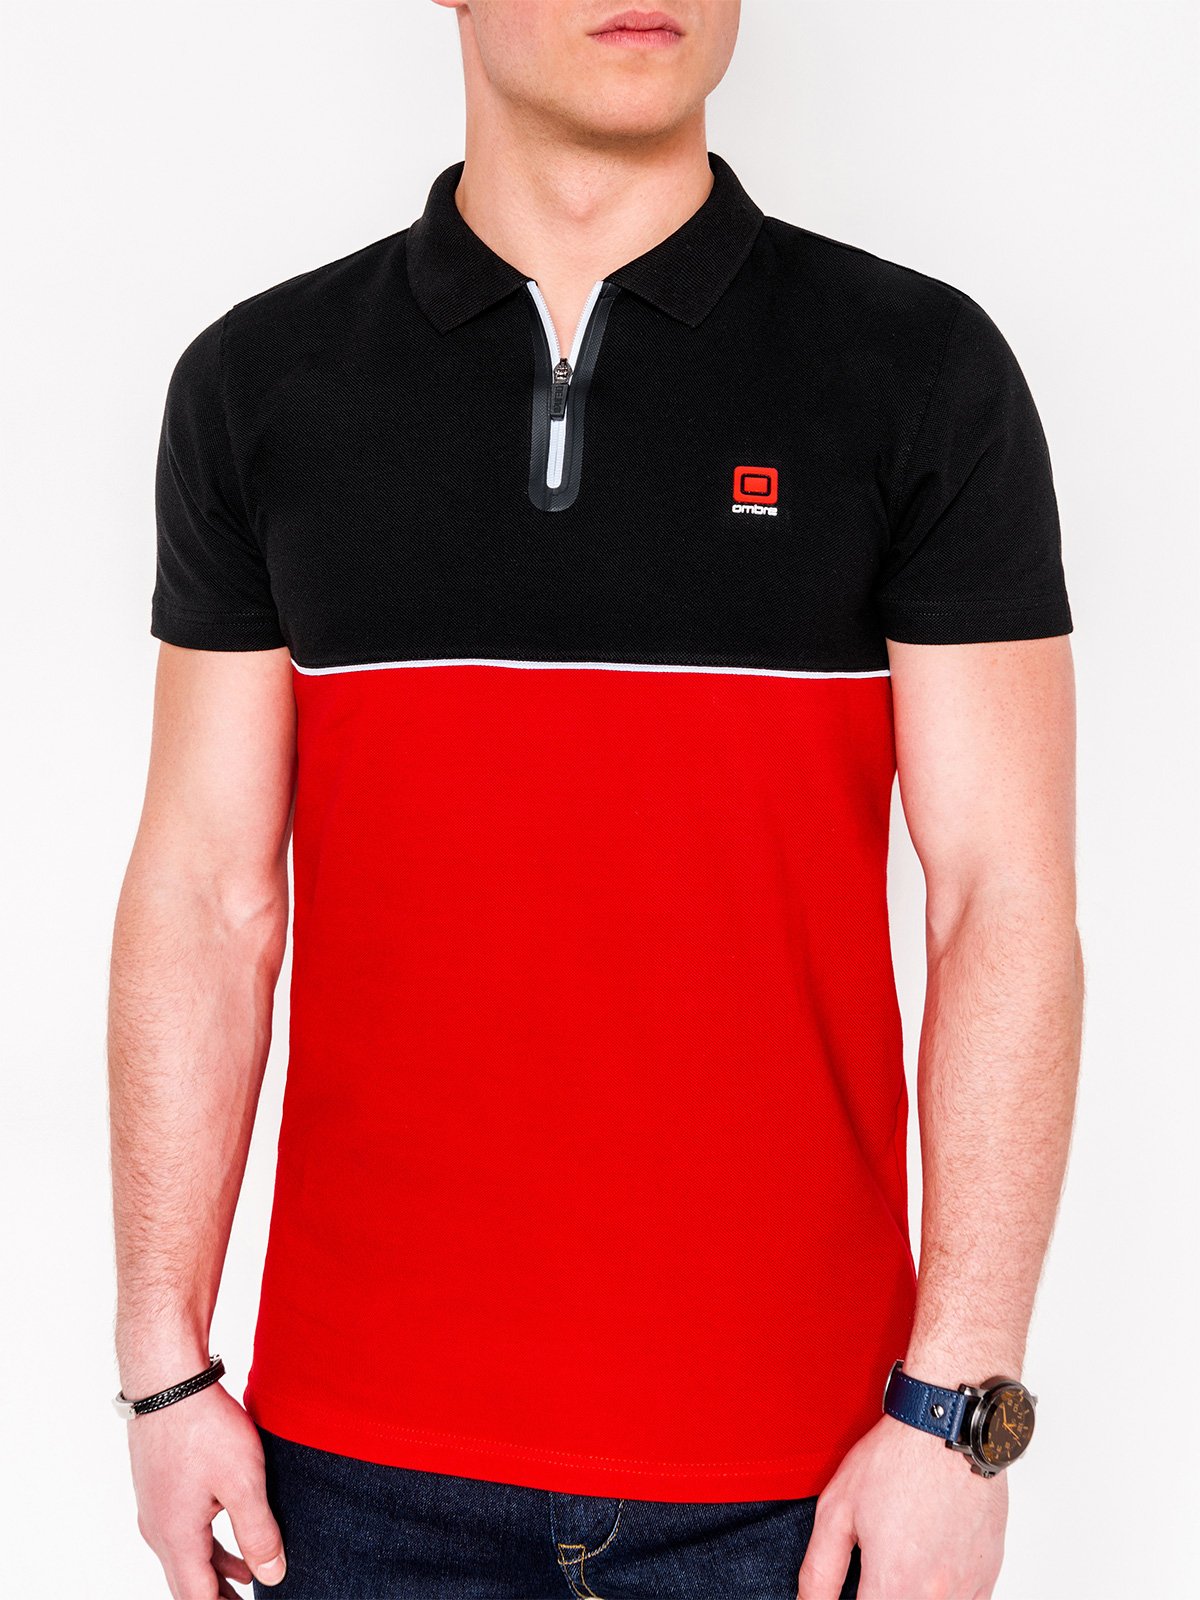 Black And Red Polo T Shirt | vlr.eng.br